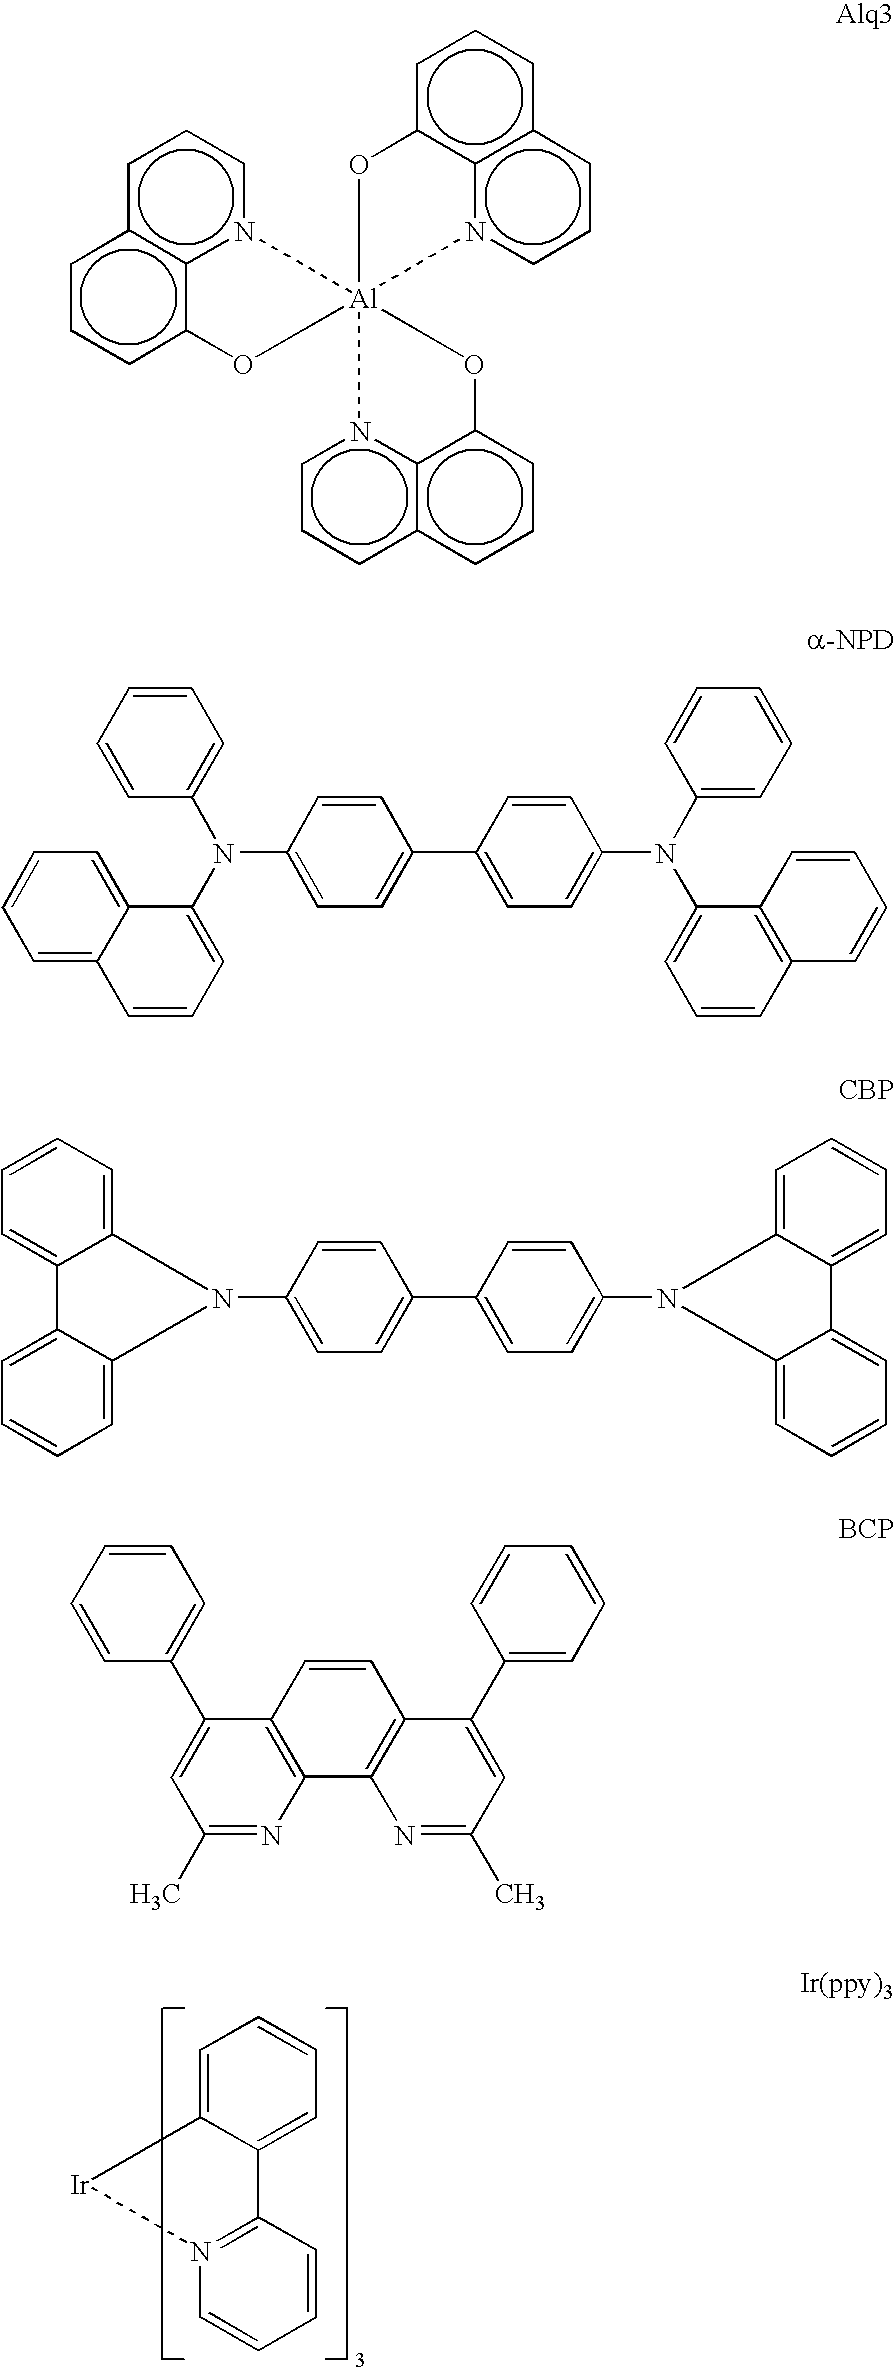 High-molecular compounds and organic luminescent devices